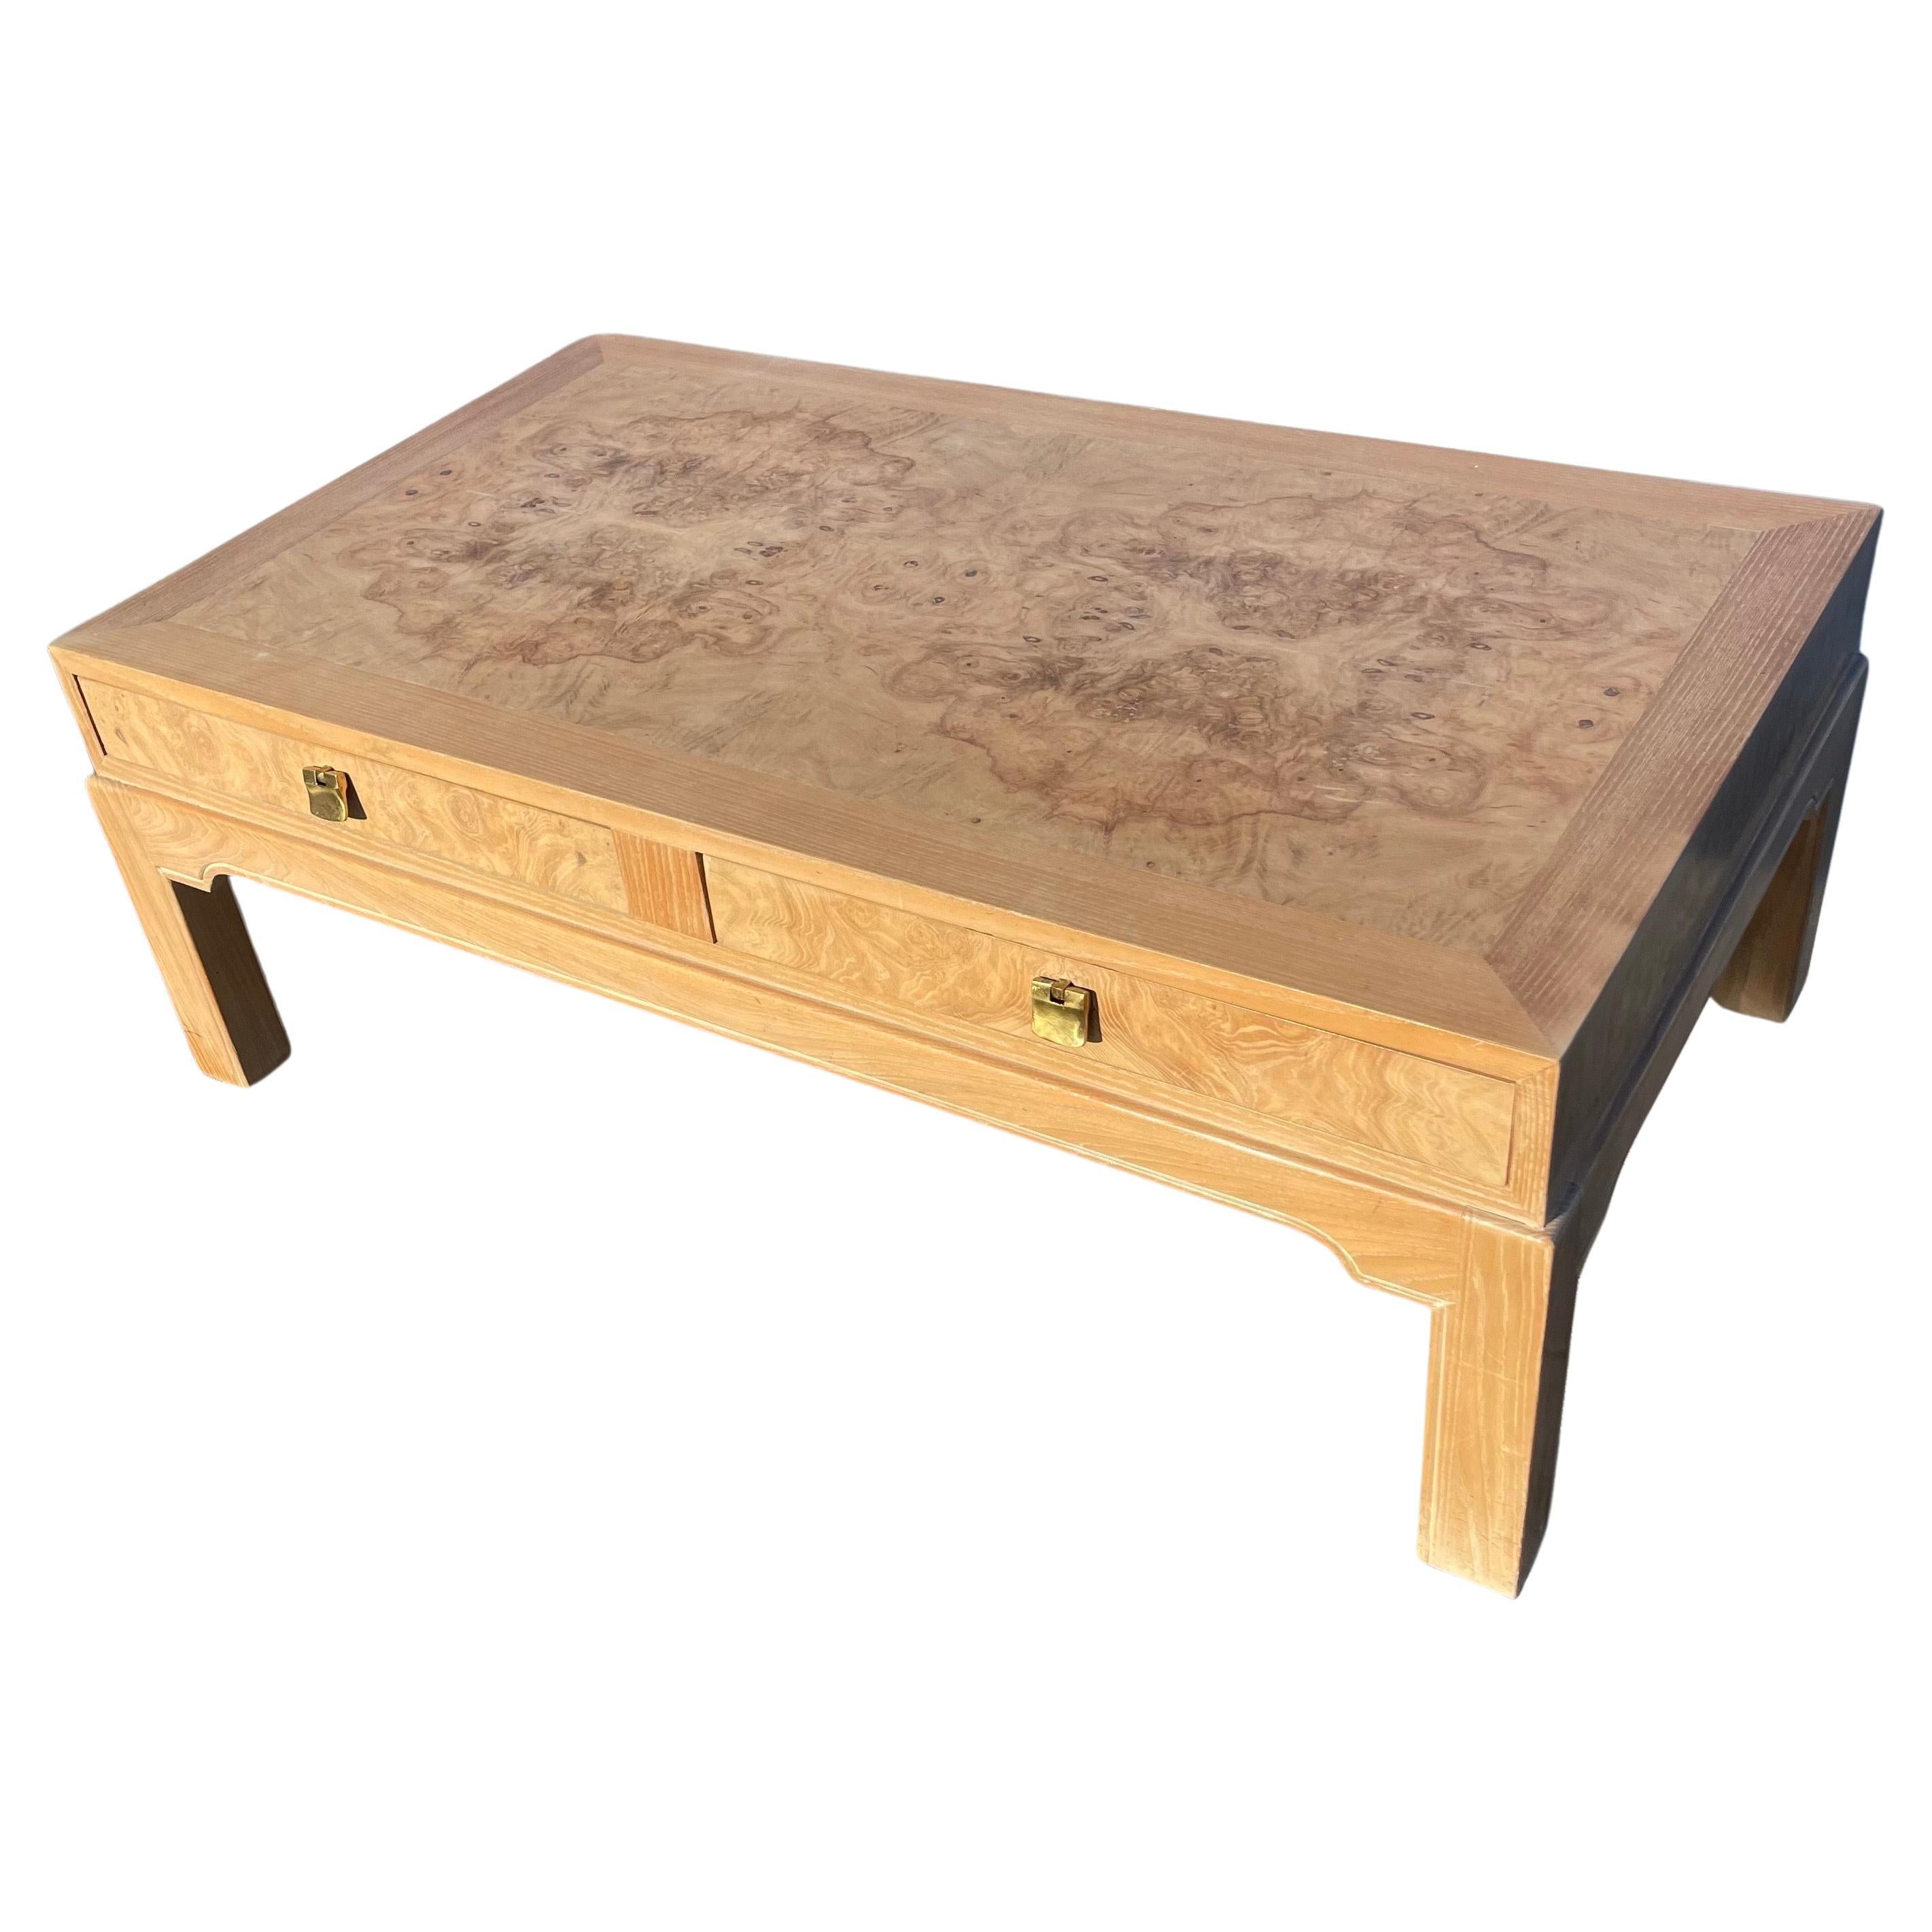 Drexel Heritage “Corinthian” Collection Burl Wood Coffee Table w/Drawers For Sale